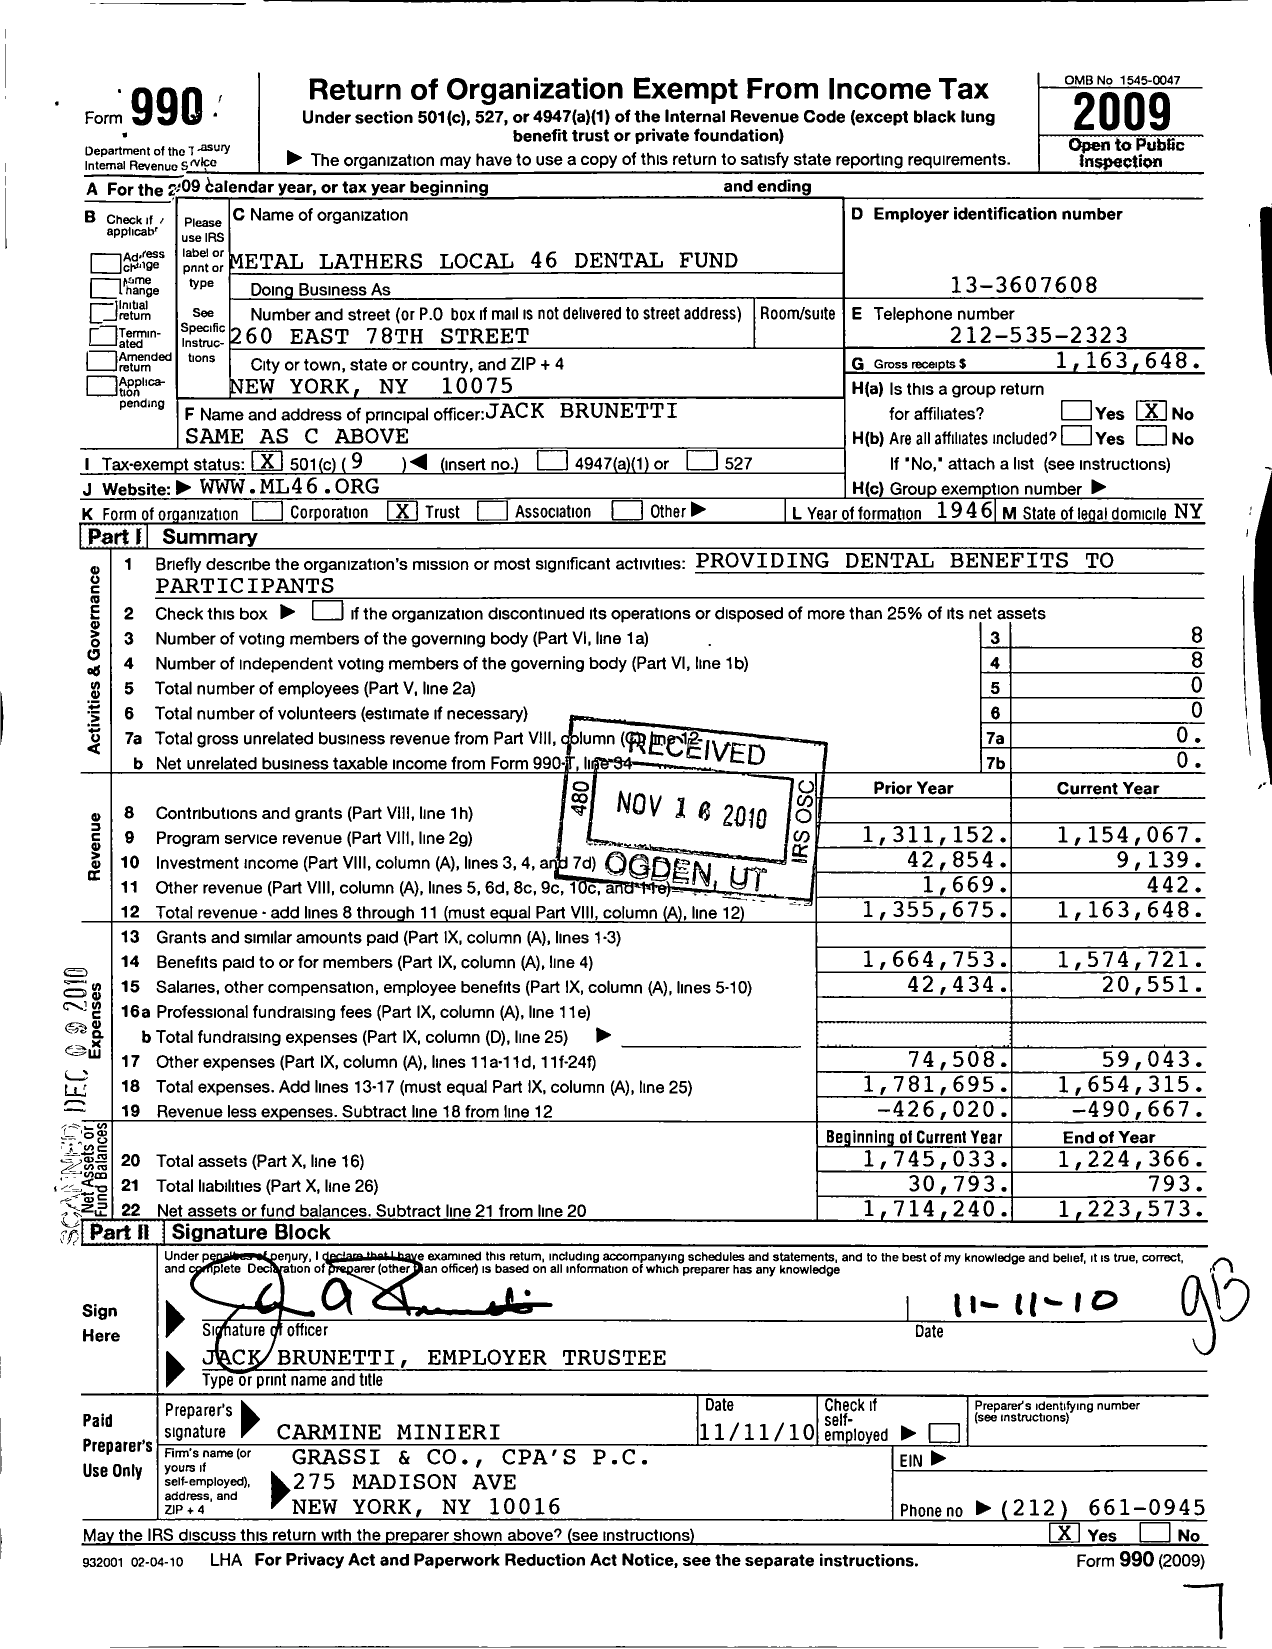 Image of first page of 2009 Form 990O for Metal Lathers Local 46 Dental Fund